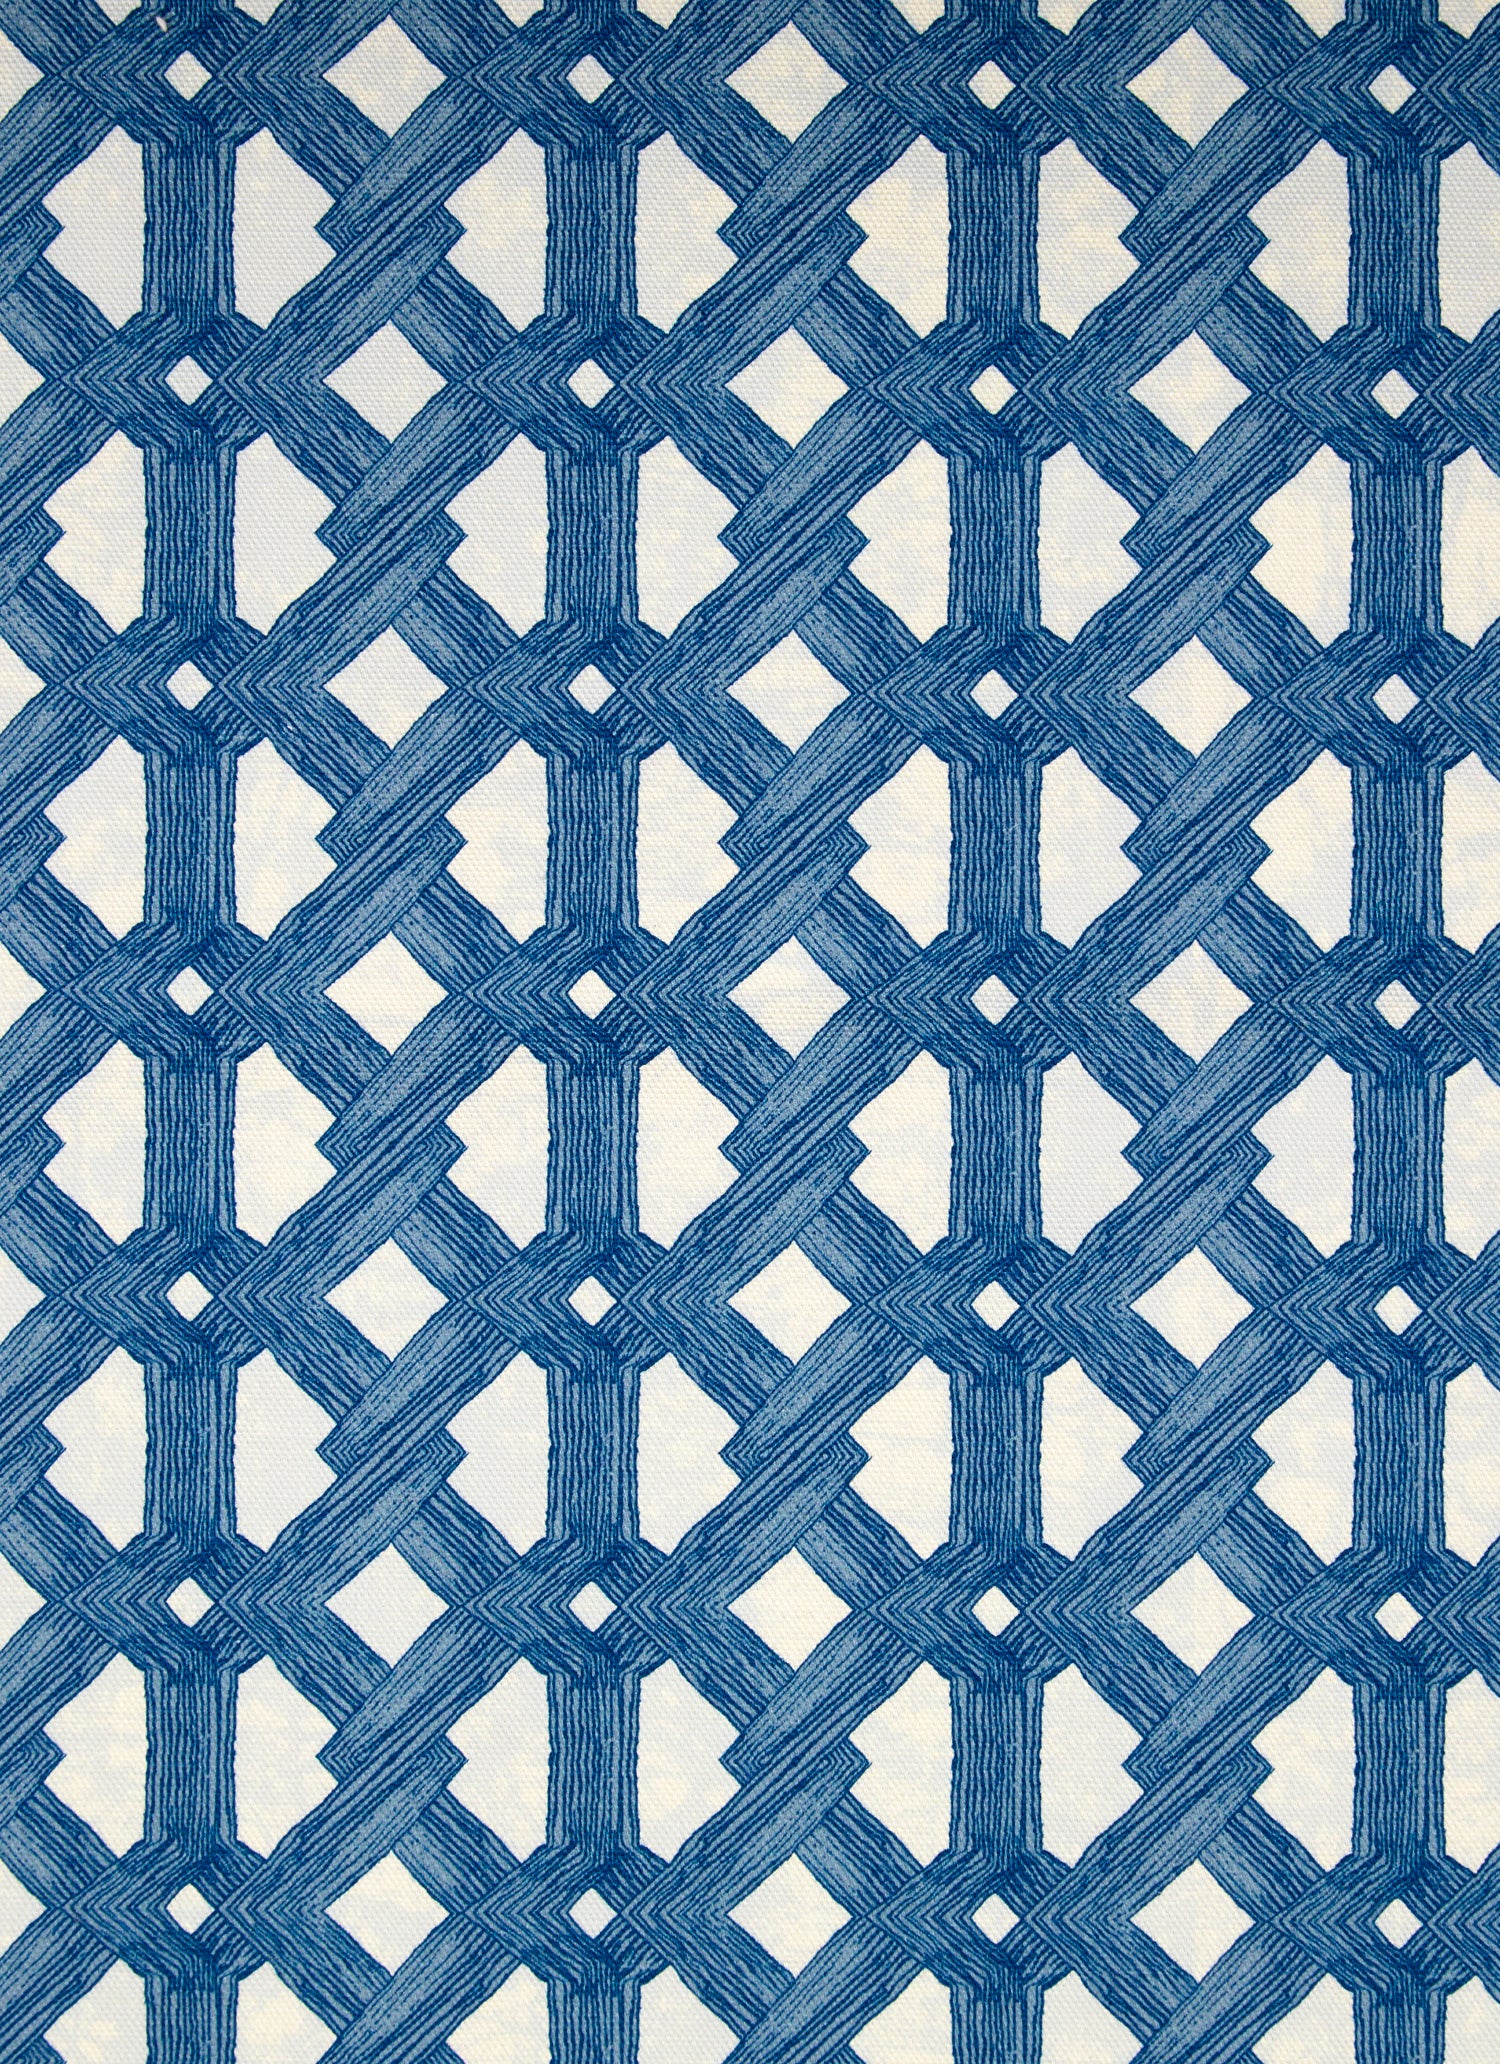 Detail of fabric in an intricate lattice print in navy on a cream field.